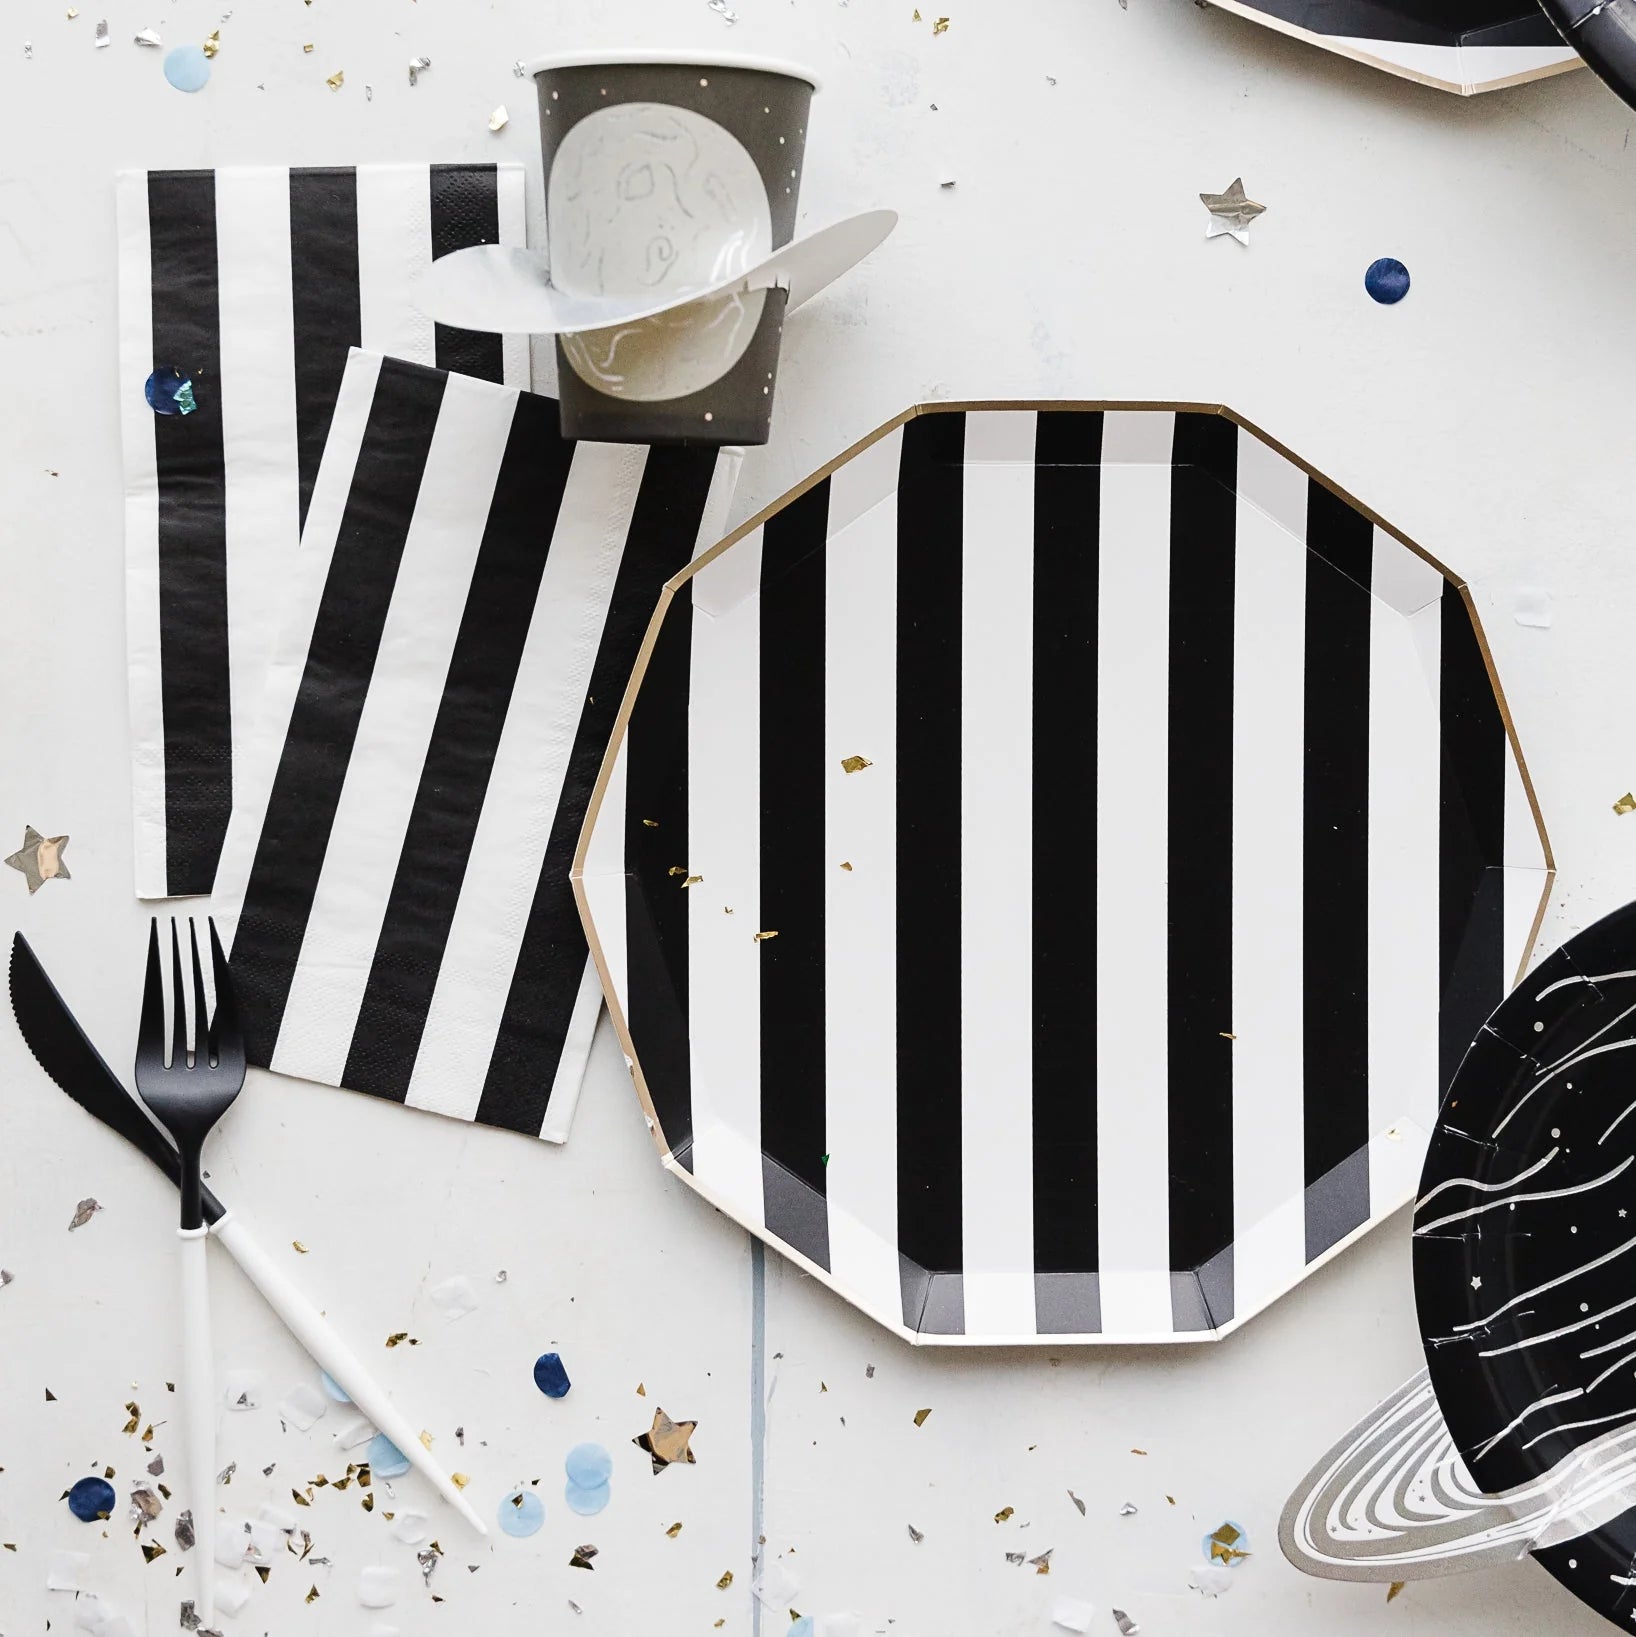 Black Noir Cabana Striped Dinner Plates 8ct | The Party Darling